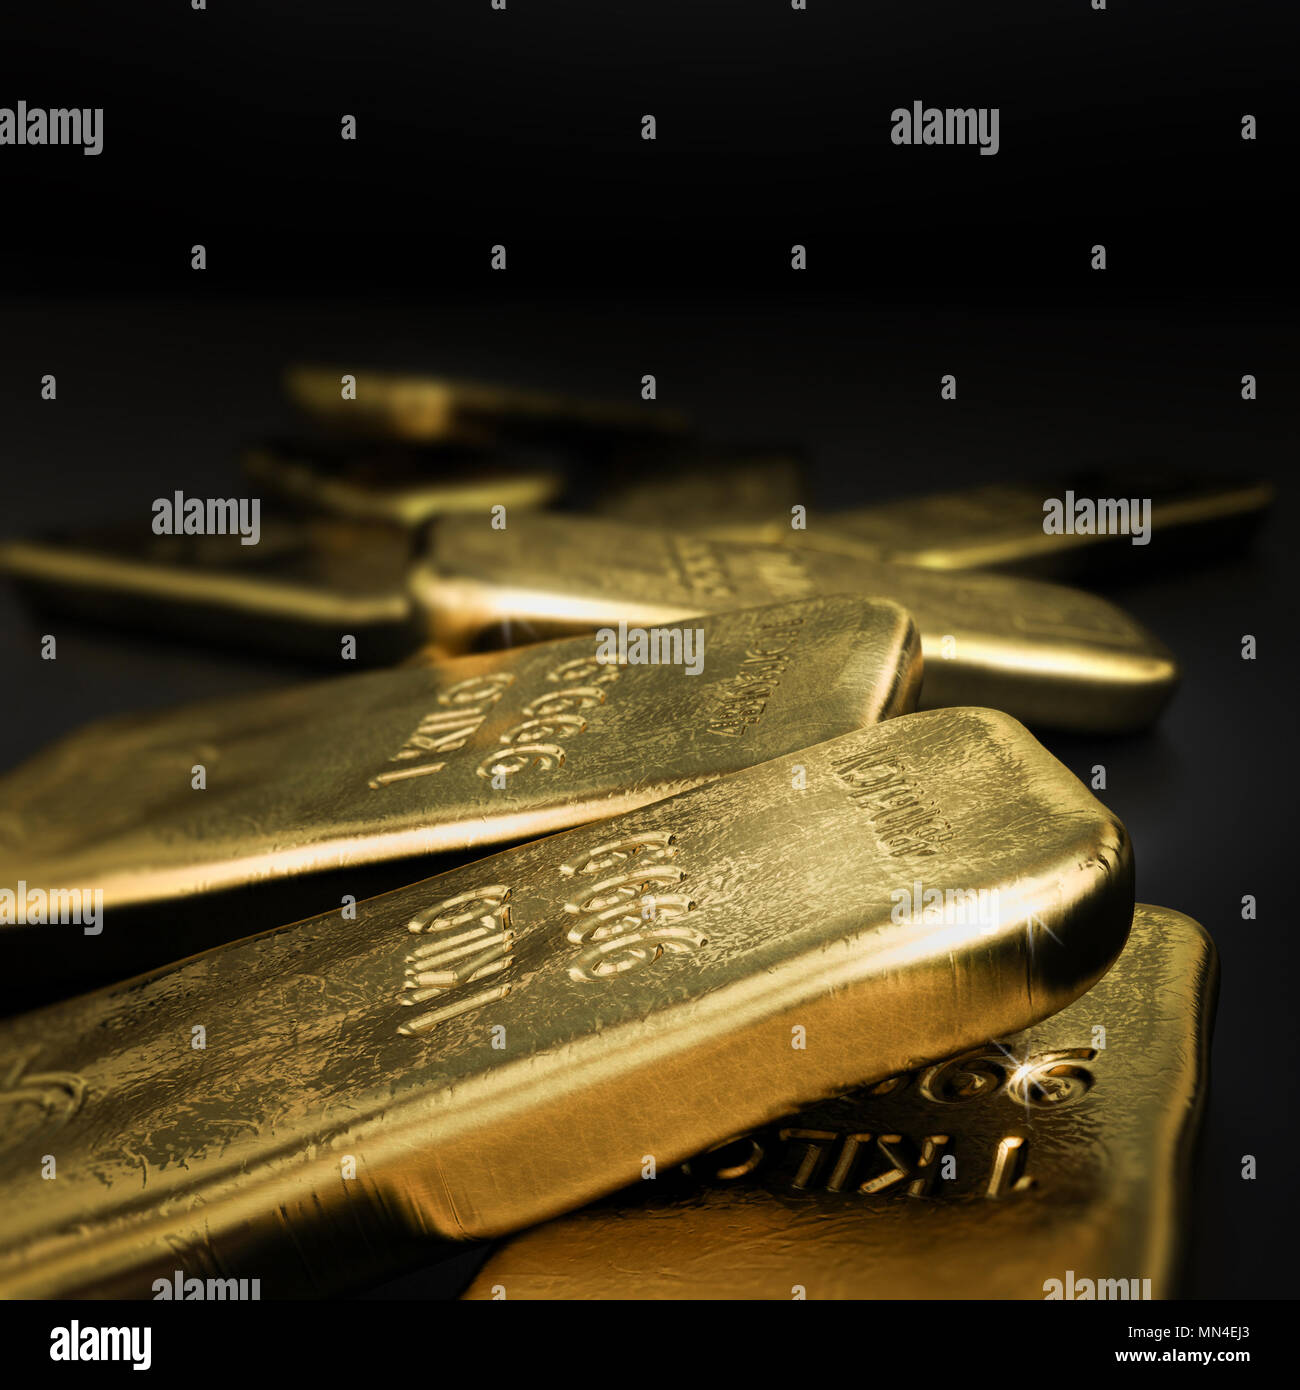 3D illustration of gold bars over black background with free space on the top,  square image. Gold commodities market concept. Stock Photo